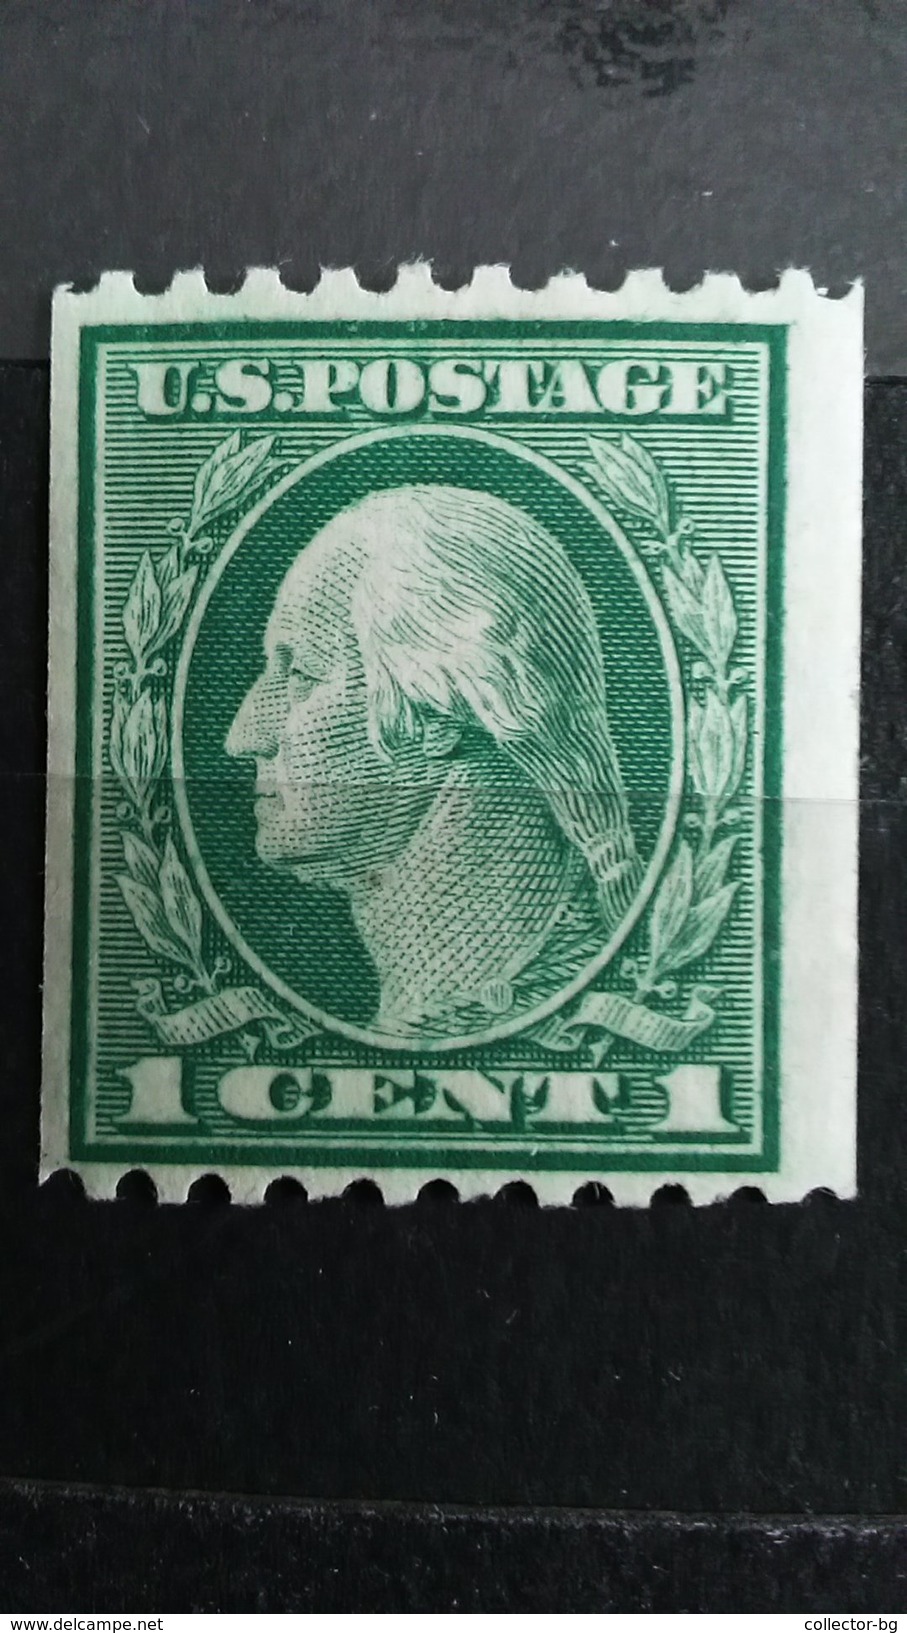 ULTRA RARE RRR 1 CENT US POSTAGE 19TH GREEN FRESH COLOR USA WASHINGTON  IMPERF SUPERB STAMP TIMBRE, For sale on Delcampe